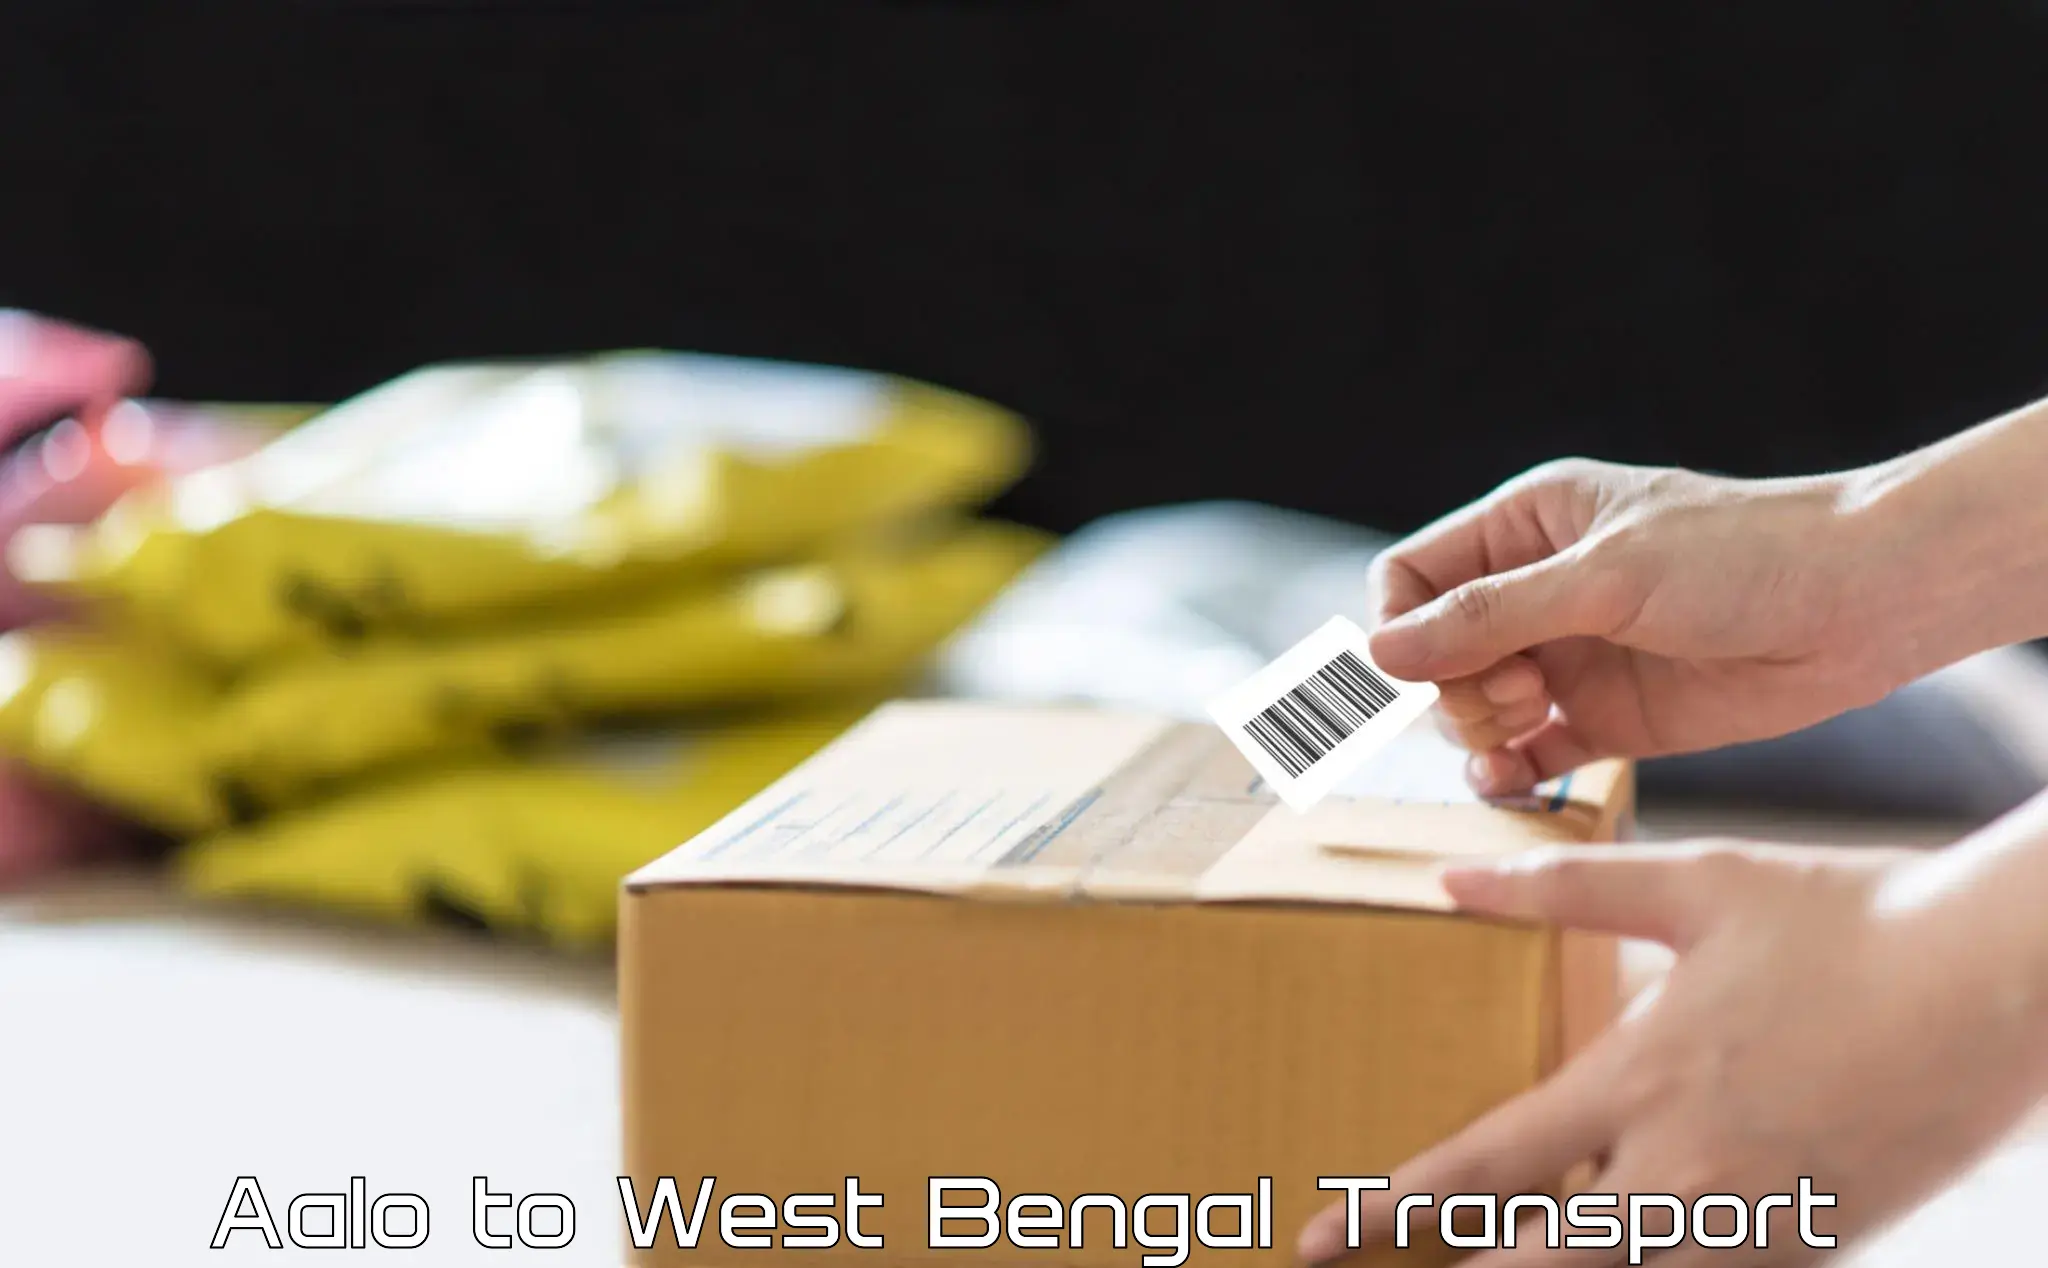 Nearby transport service Aalo to West Bengal